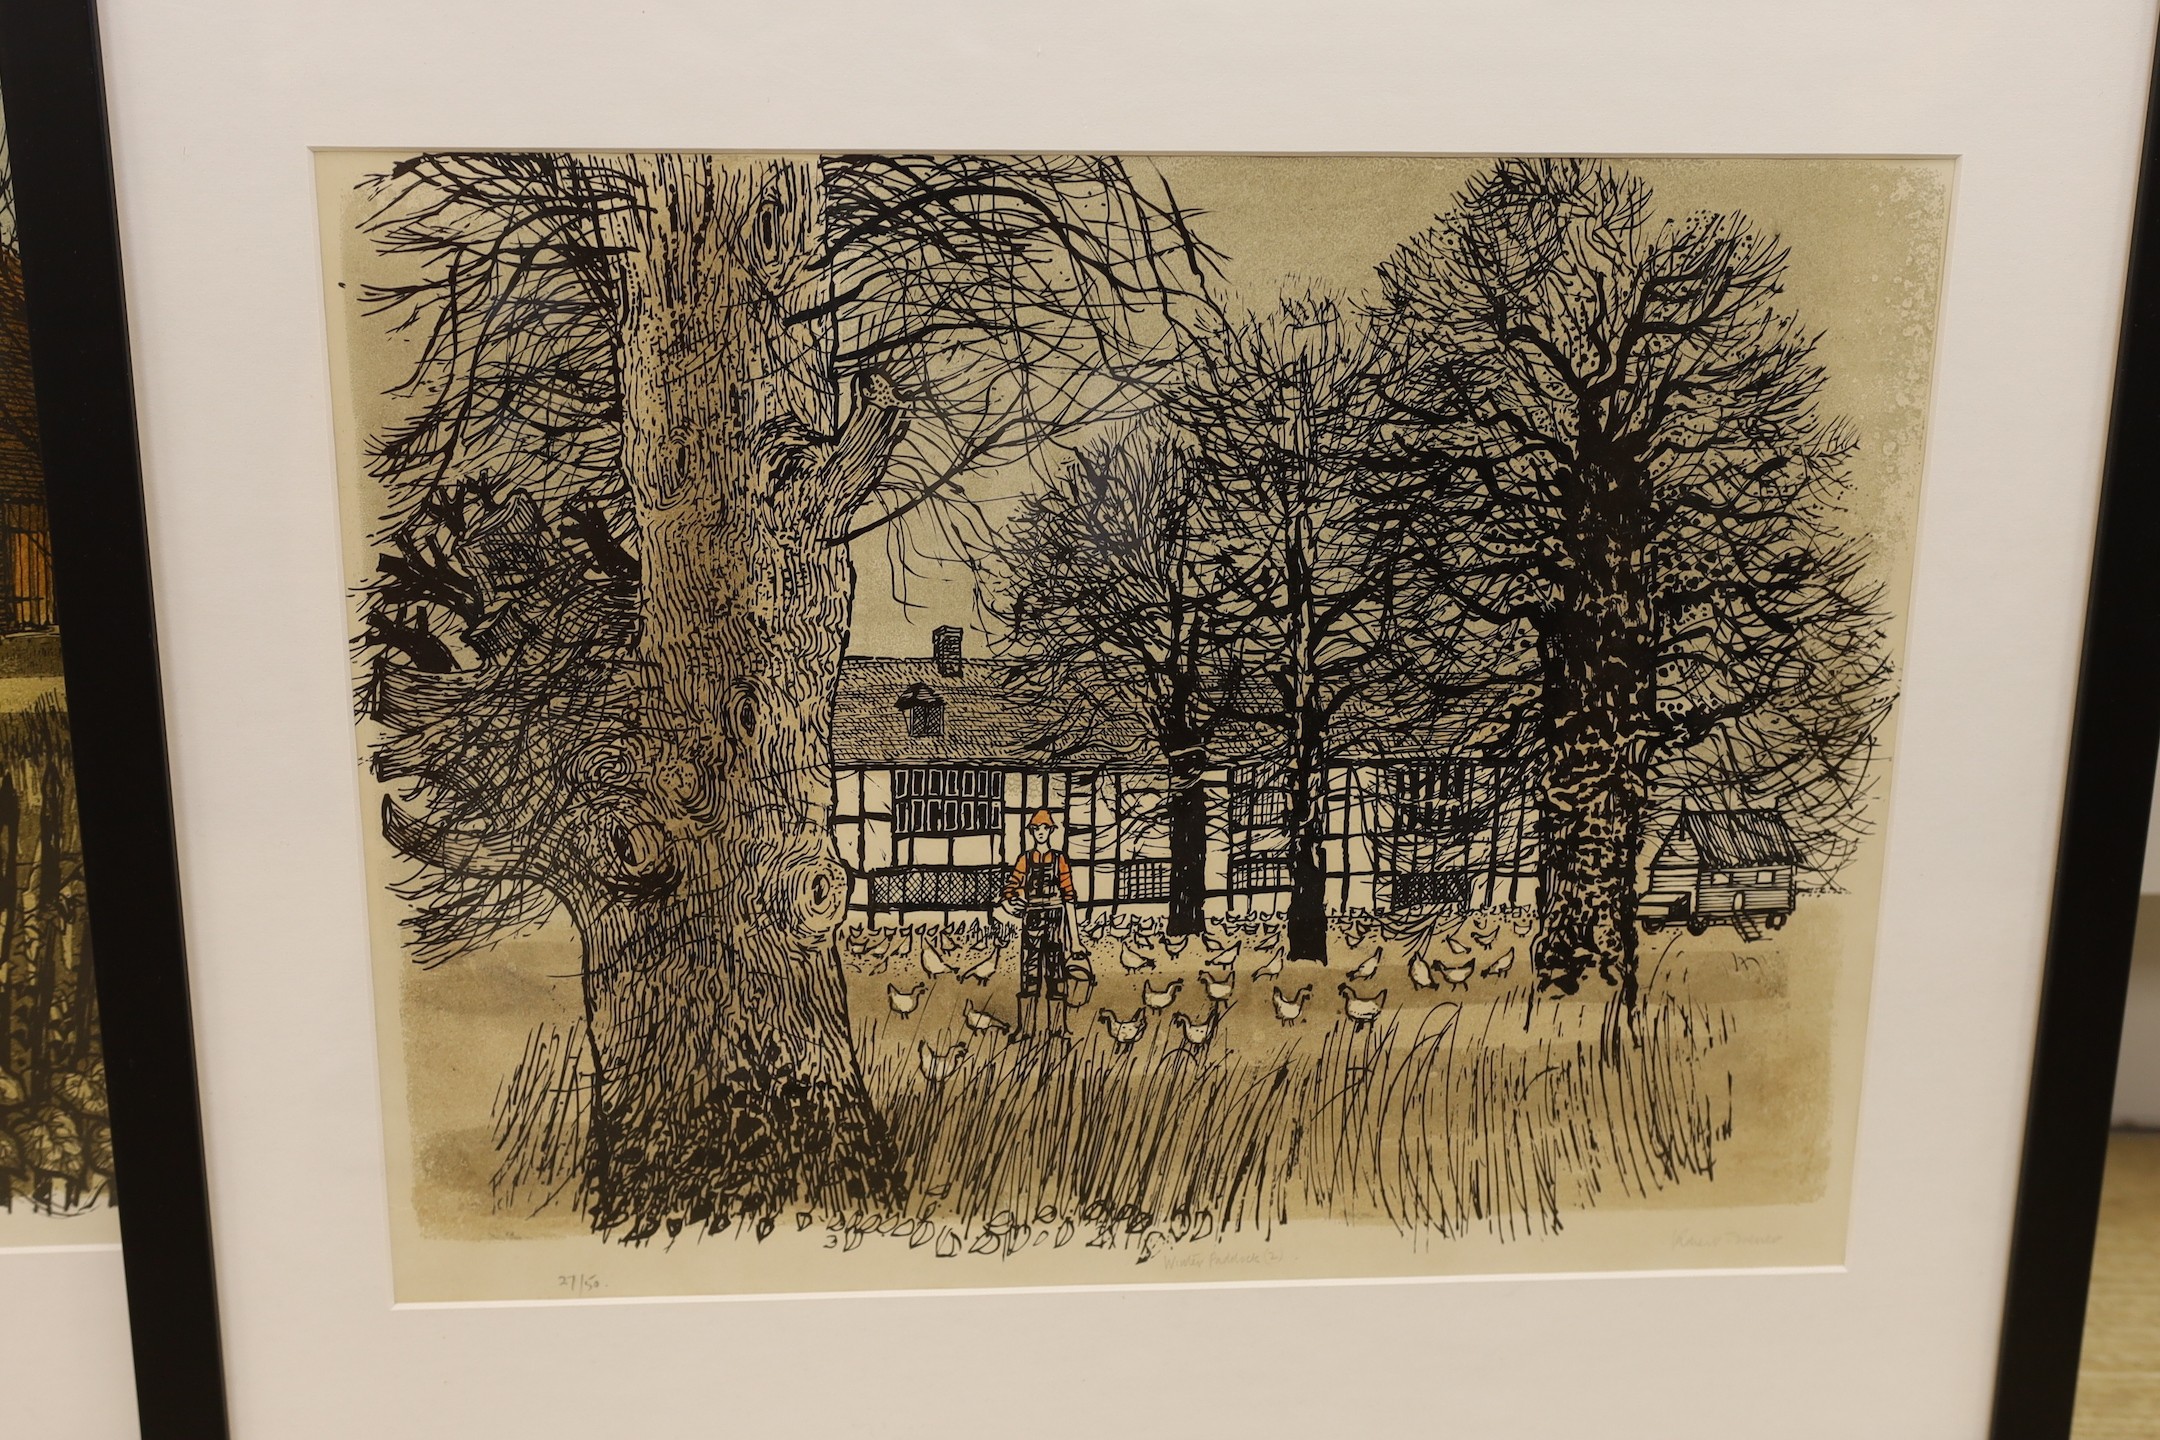 Robert Tavener (1920-2004) four lithographs, ‘Winter Paddock (2)’ 27/50, Glynde - Sussex’, ‘Churchyard and Downs, Glynde - Sussex’, ‘Old Farm and Barn’, all signed in pencil, largest 43 x 59cm